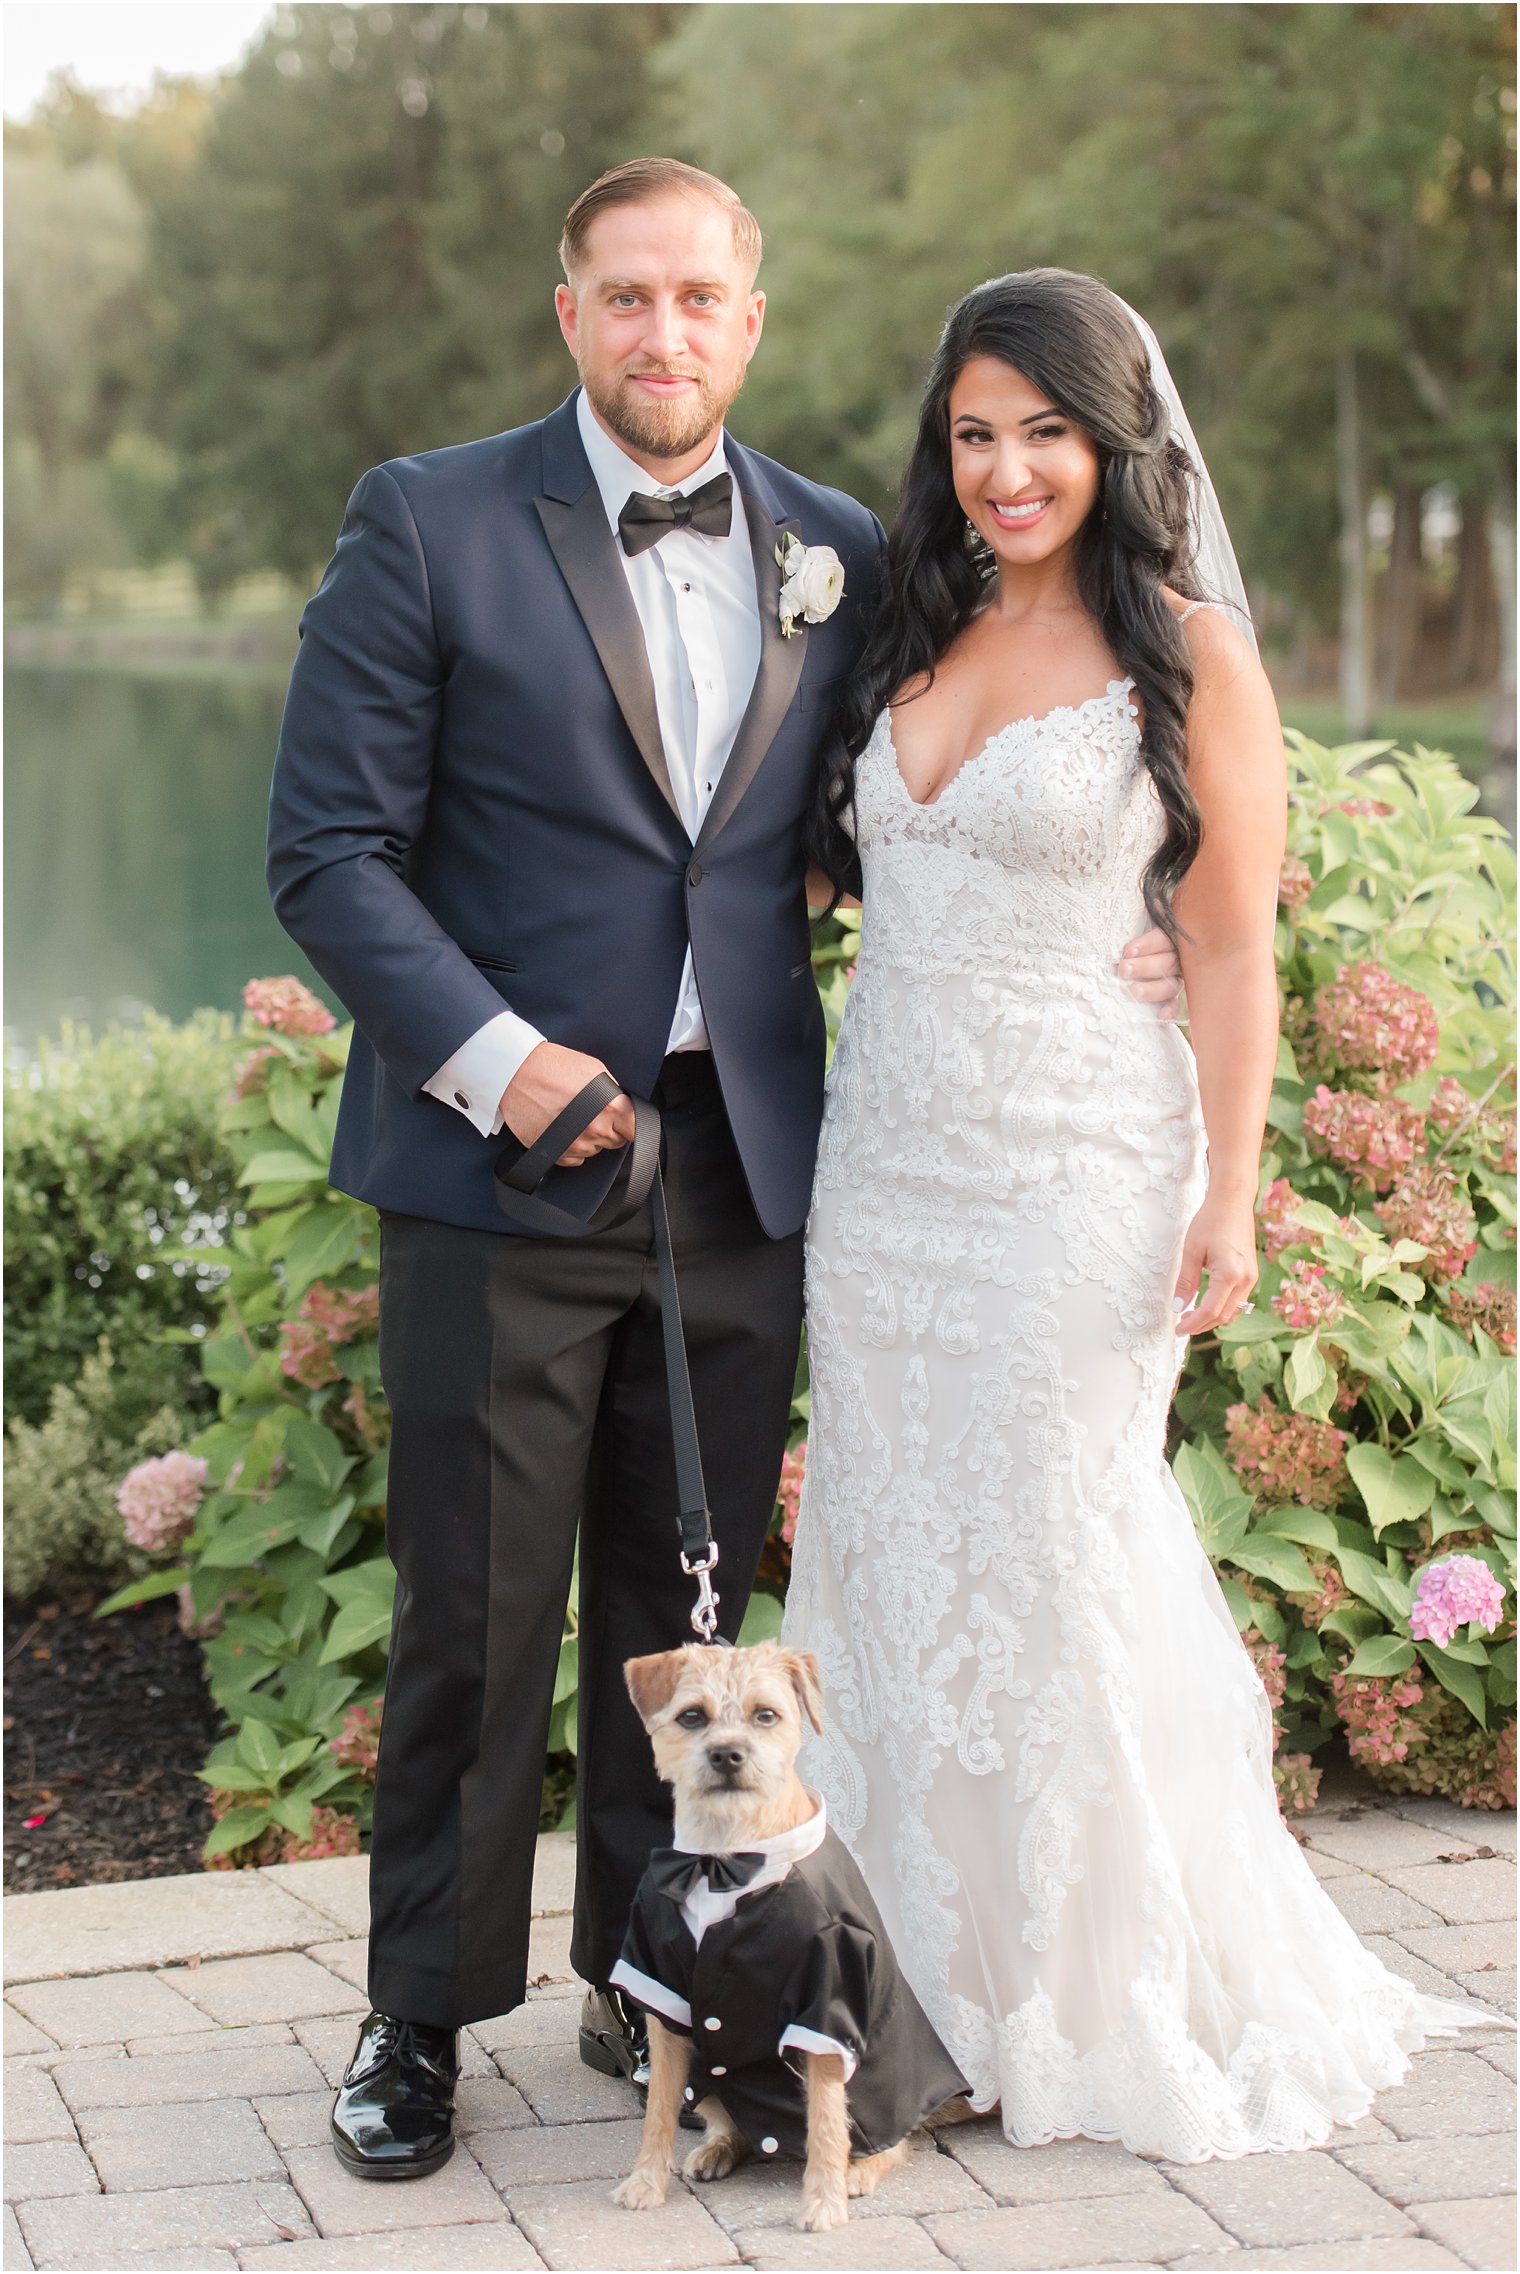 New Jersey wedding portraits with bride, groom, and their dog in tux